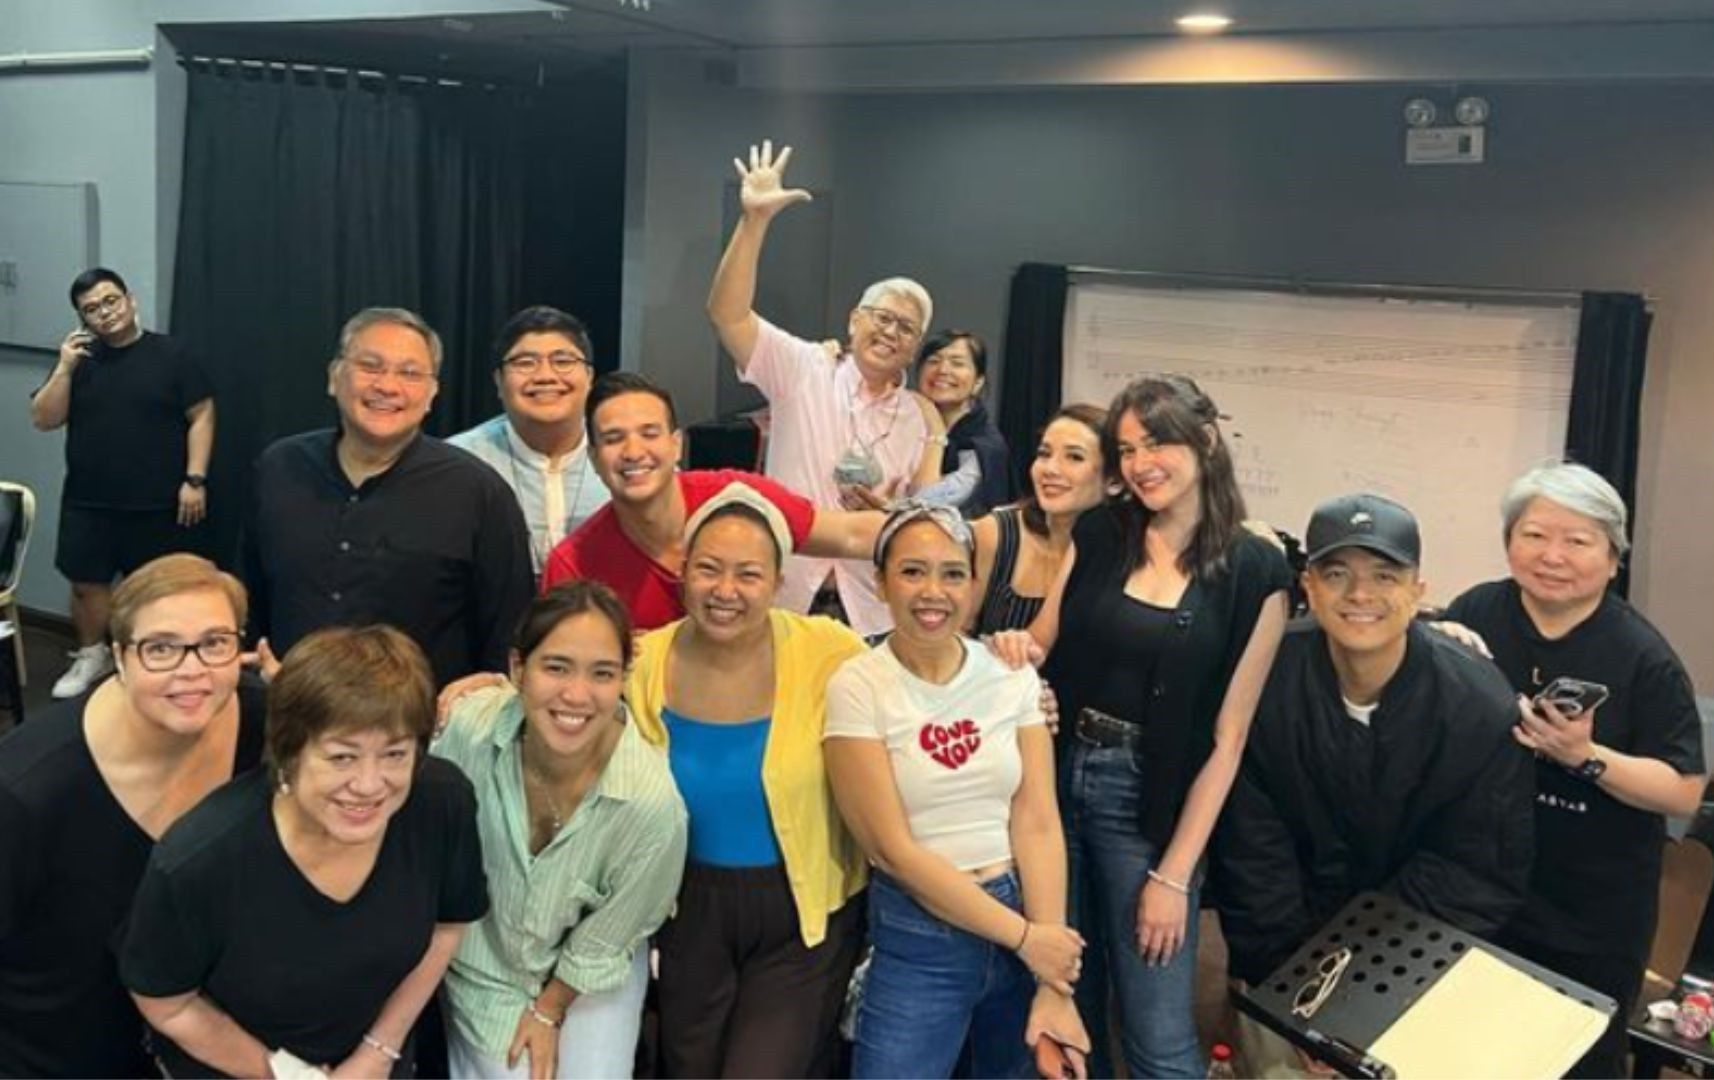 Bea Alonzo to debut as singer, theater actress in 'Ang Larawan' concert